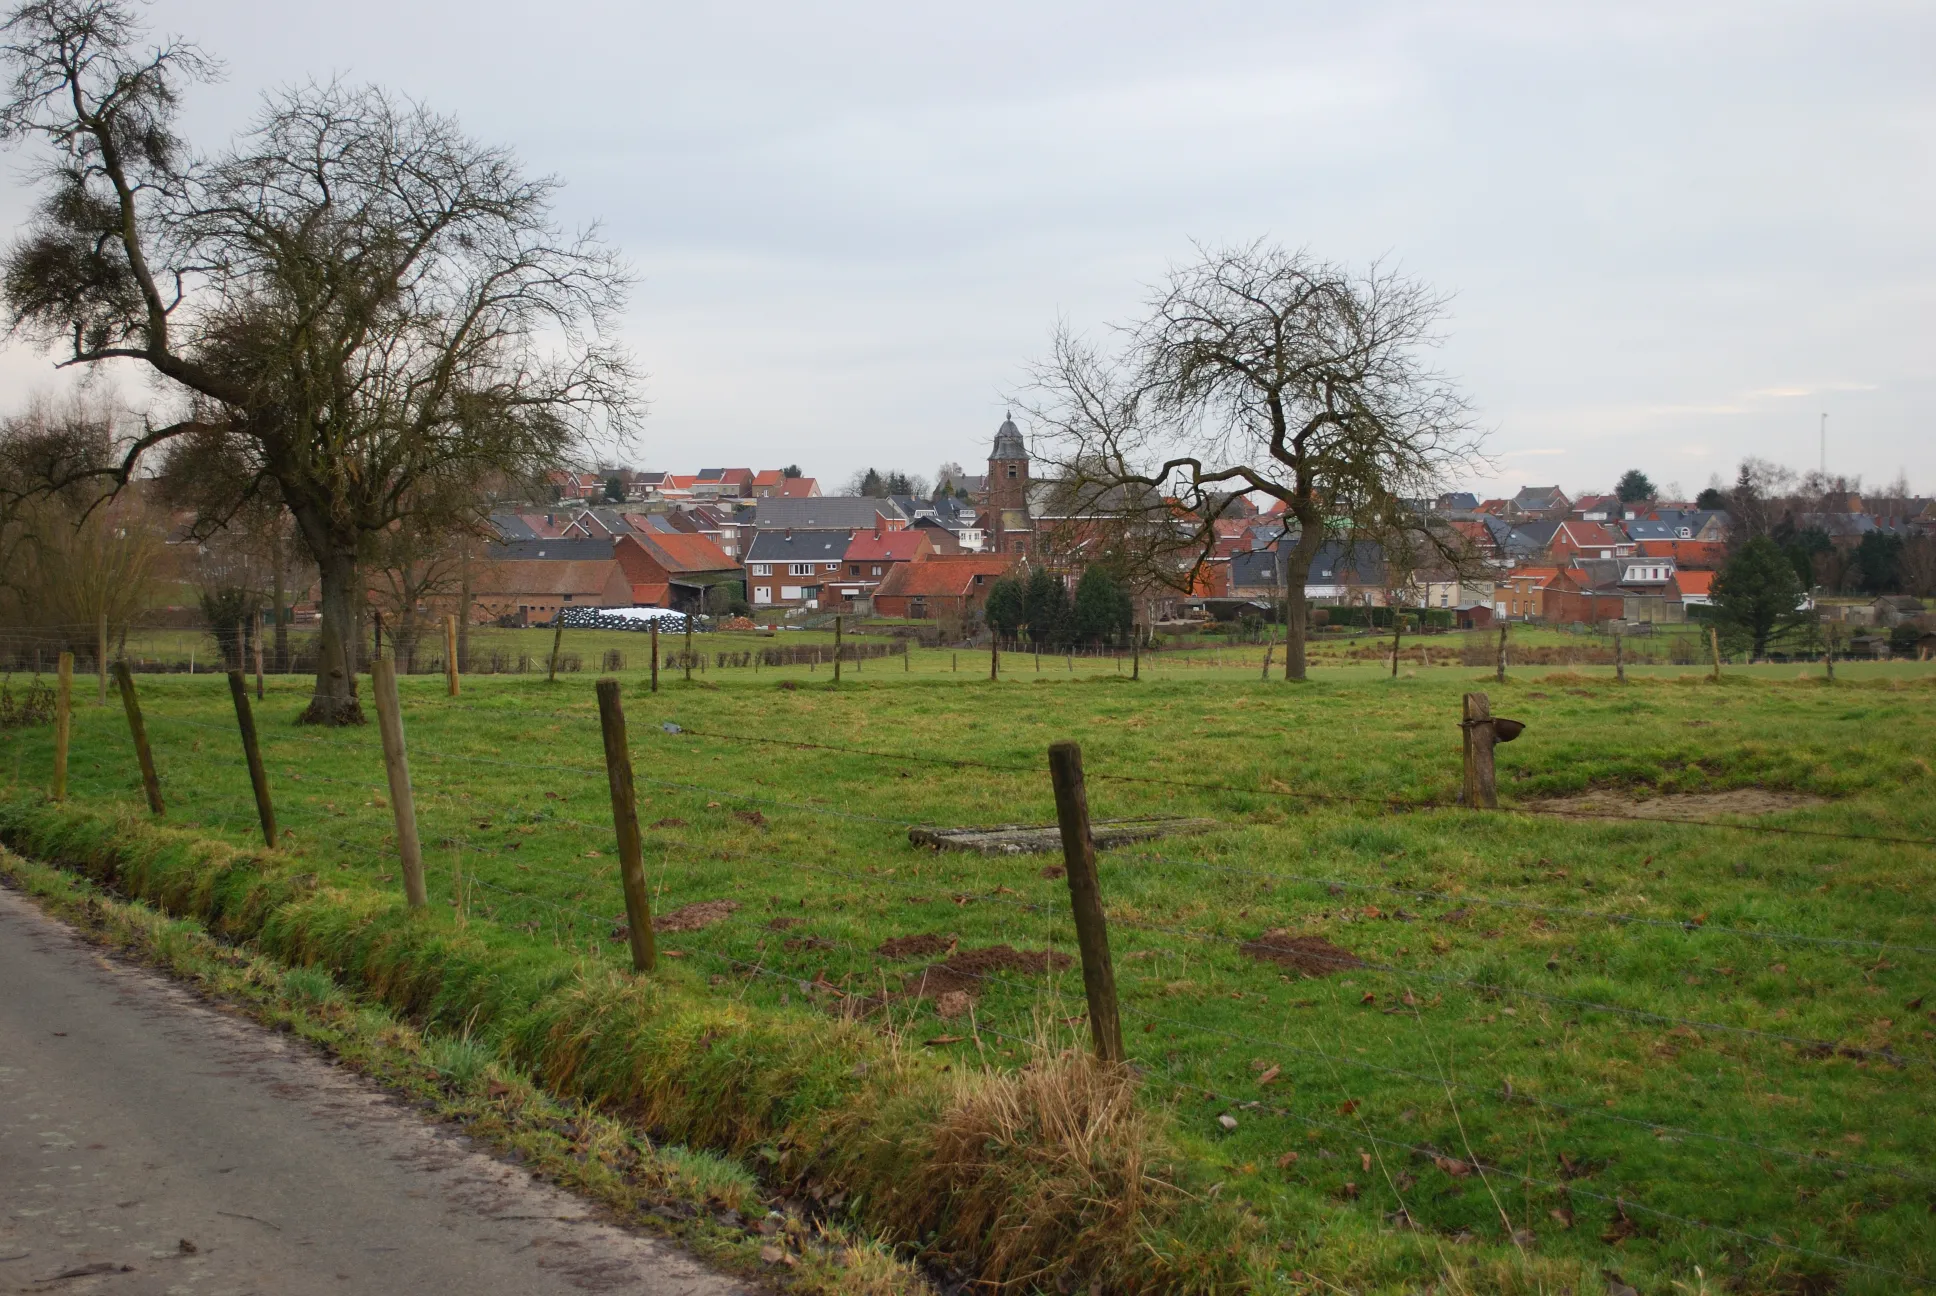 Photo showing: Village centre of Leerbeek (commune of Gooik, Belgium) from the South. Nikon D60 f=32mm f/5 at 1/50s ISO 200. Processed using Nikon ViewNX 1.0.3.